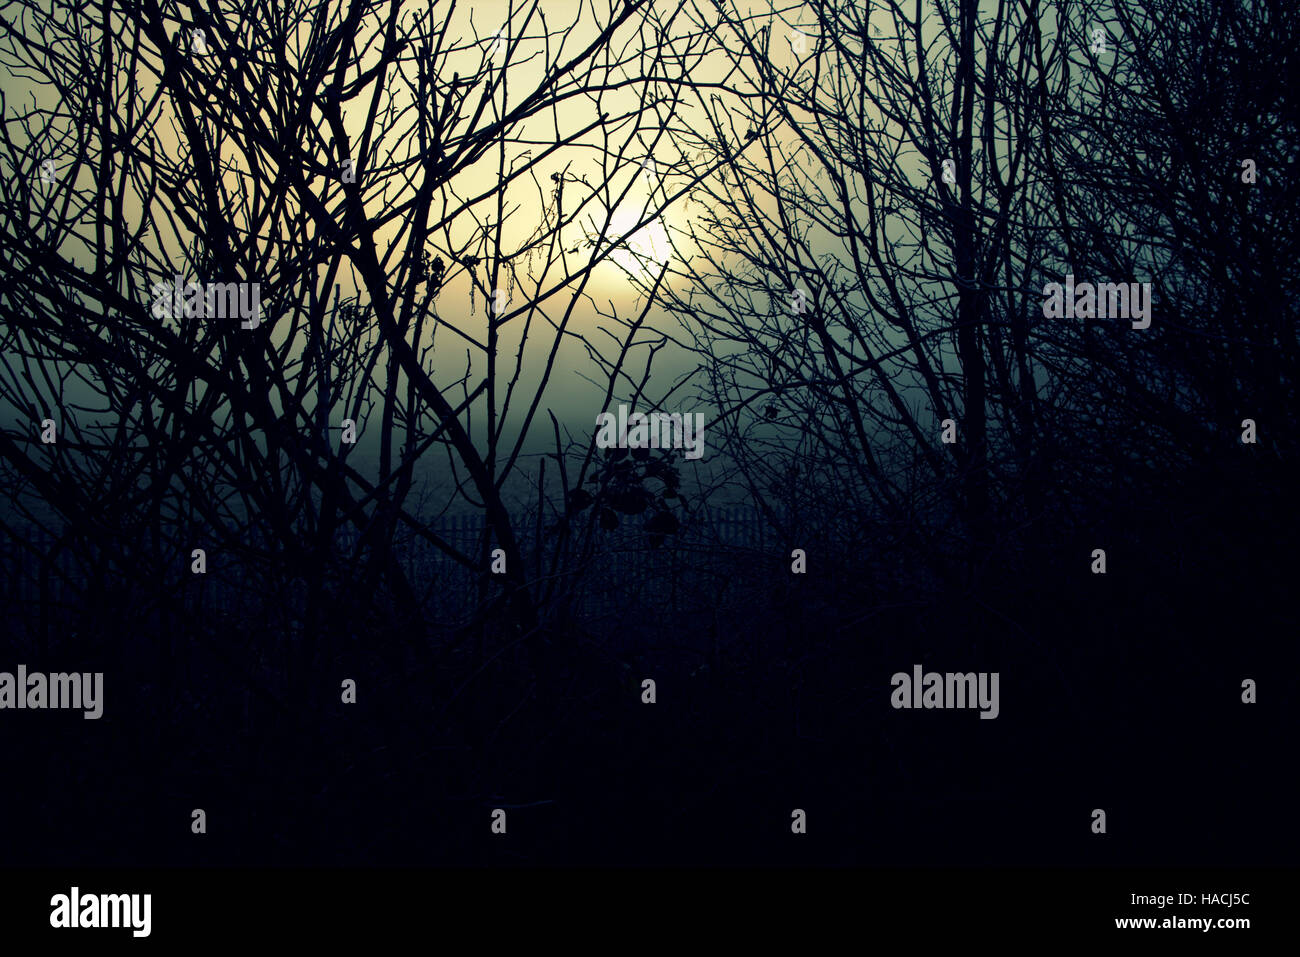 sunrise sunset moon rise through branches of trees grass Stock Photo